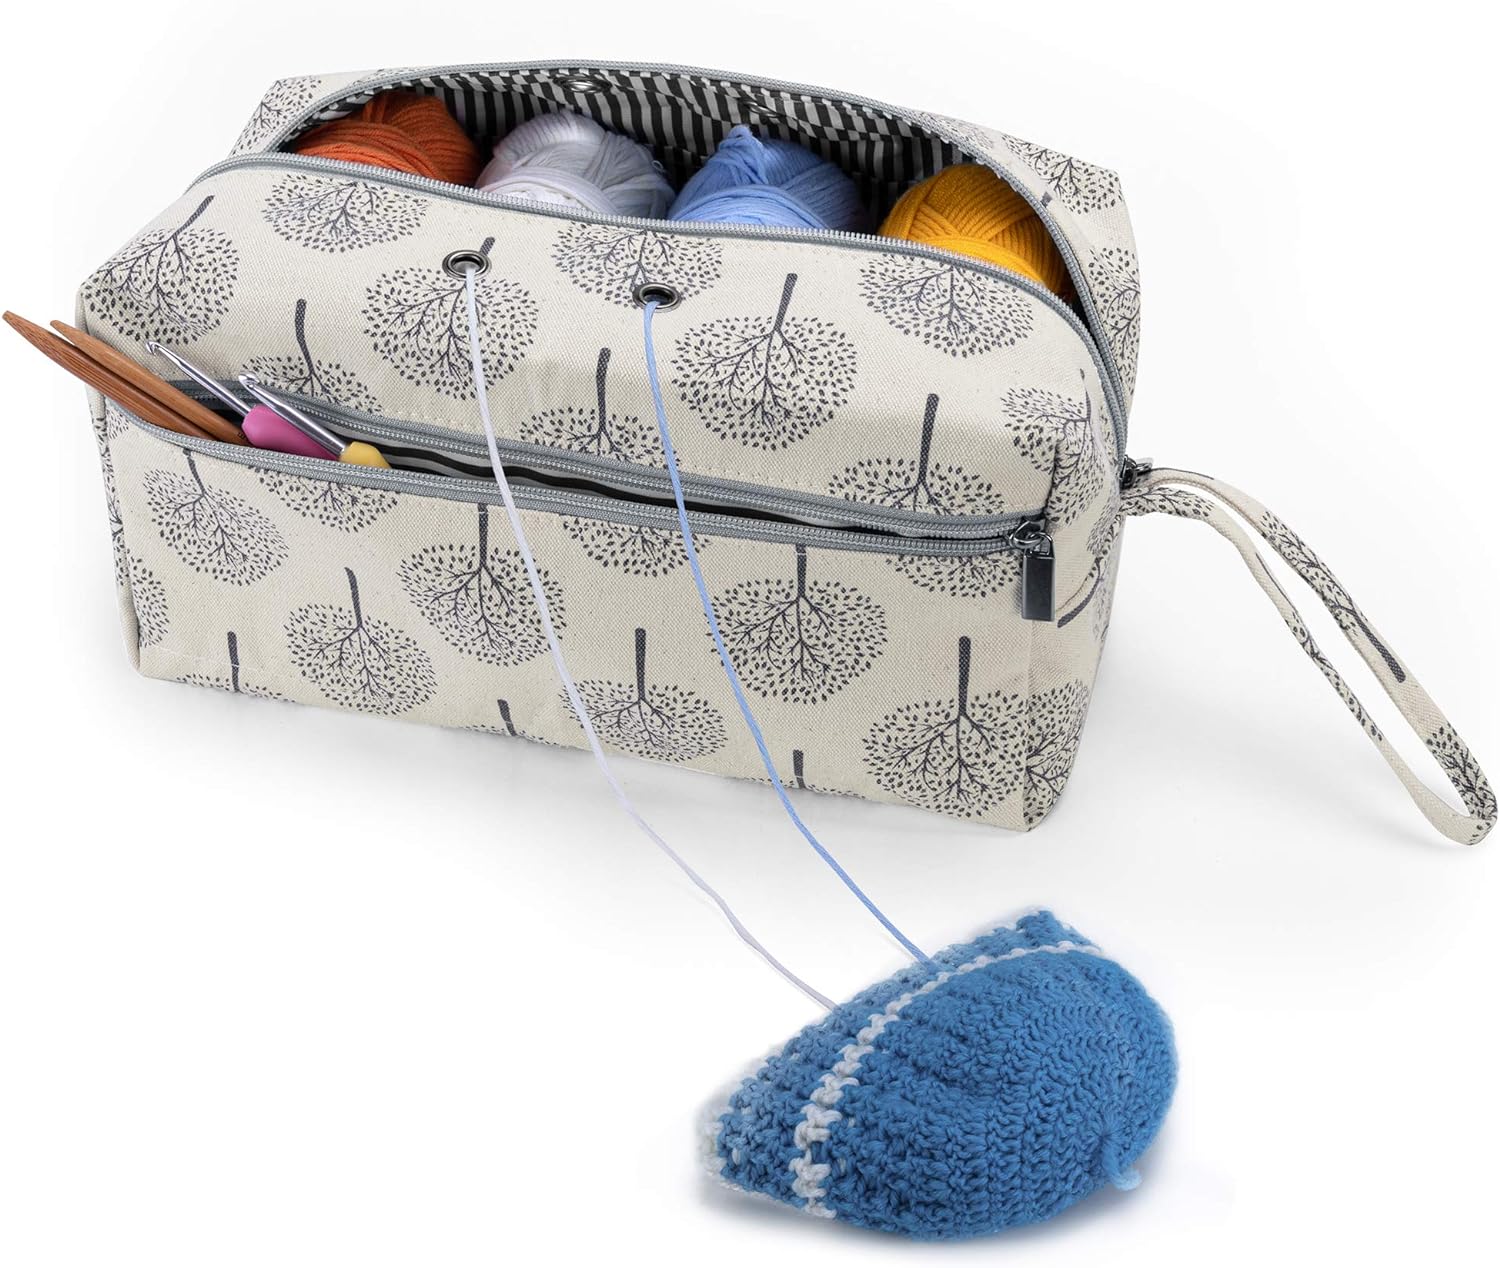 Luxja Yarn Storage Bag, Carrying Knitting Bag for Yarn Skeins, Crochet Hooks, Knitting Needles (up to 10 Inches) and Other Small Accessories (Large, Trees)